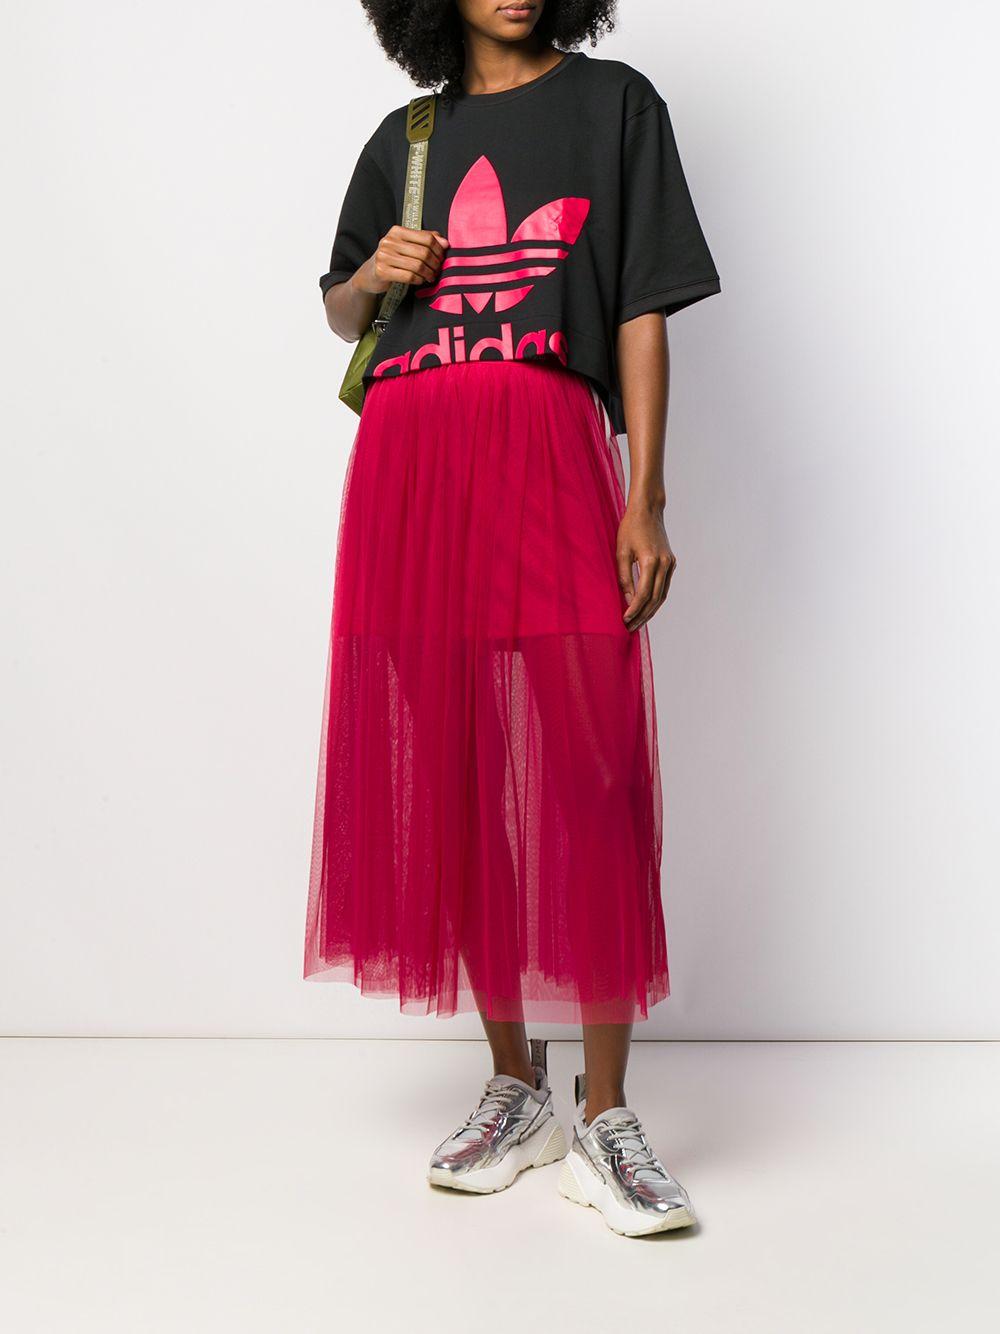 adidas High Waisted Tulle Skirt in Pink - Lyst